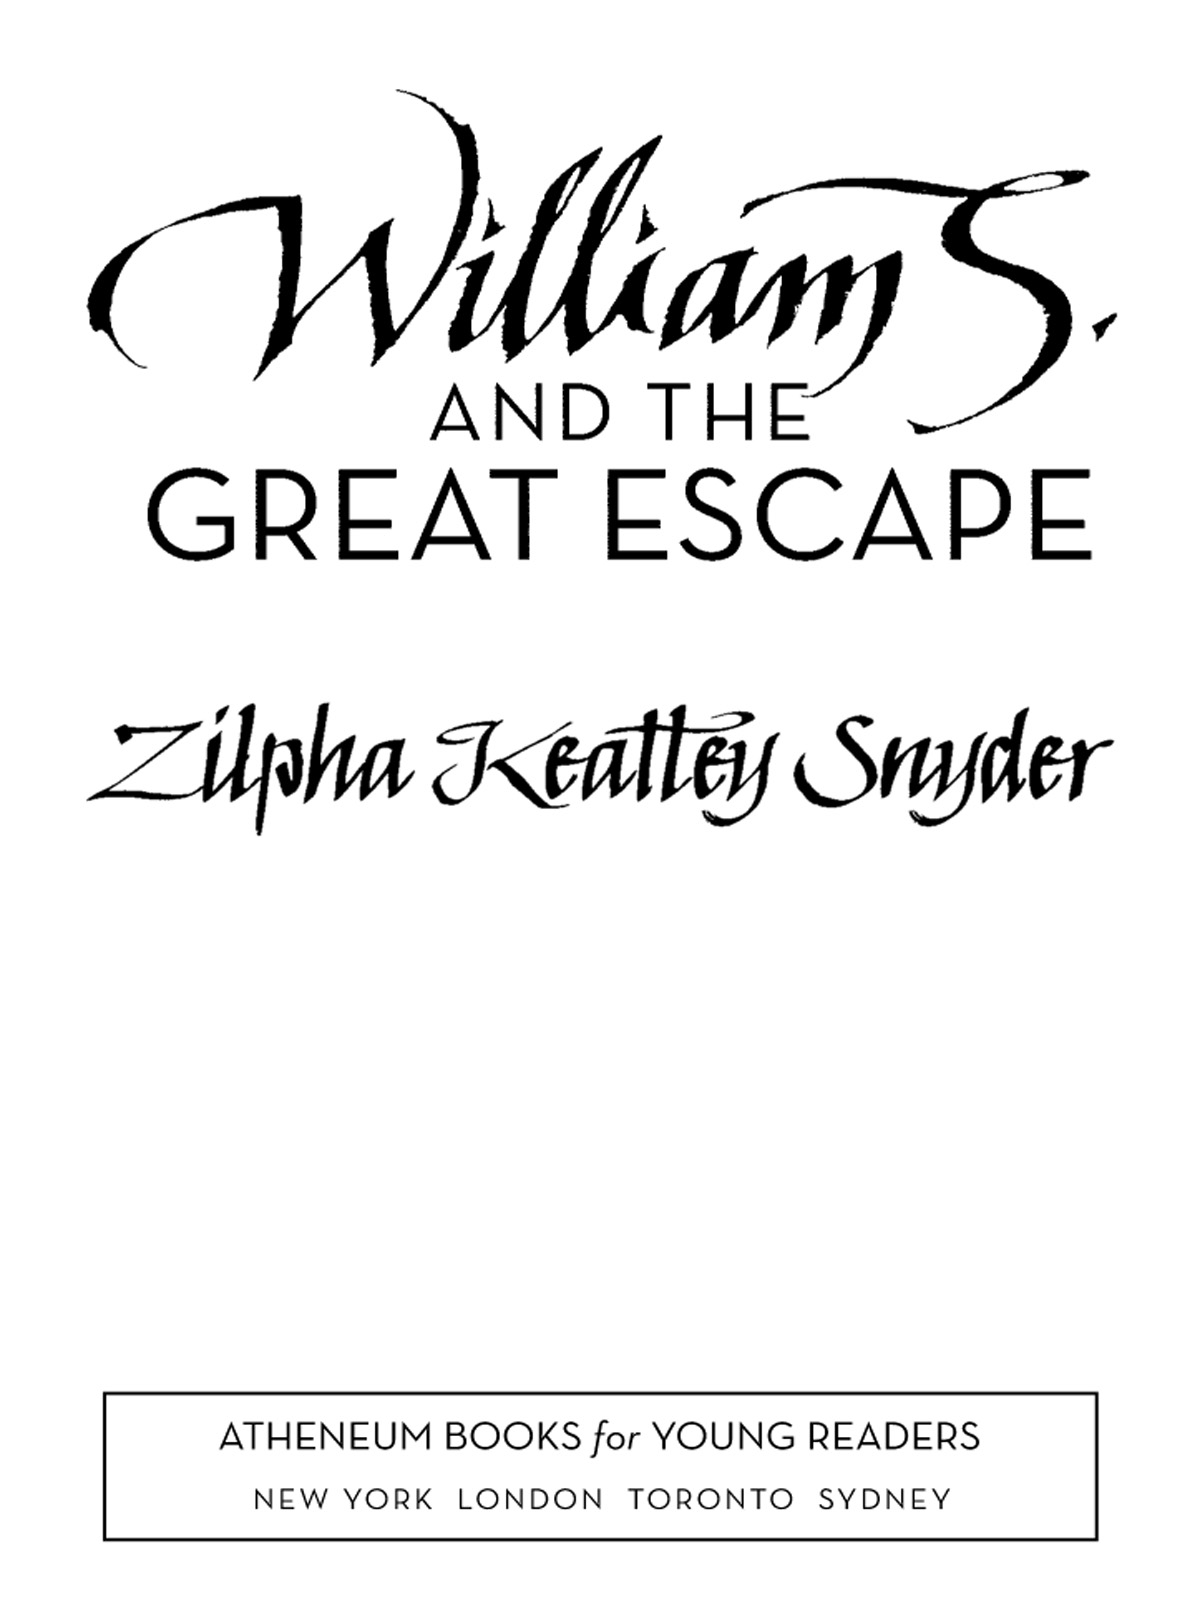 William S. and the Great Escape (2009)